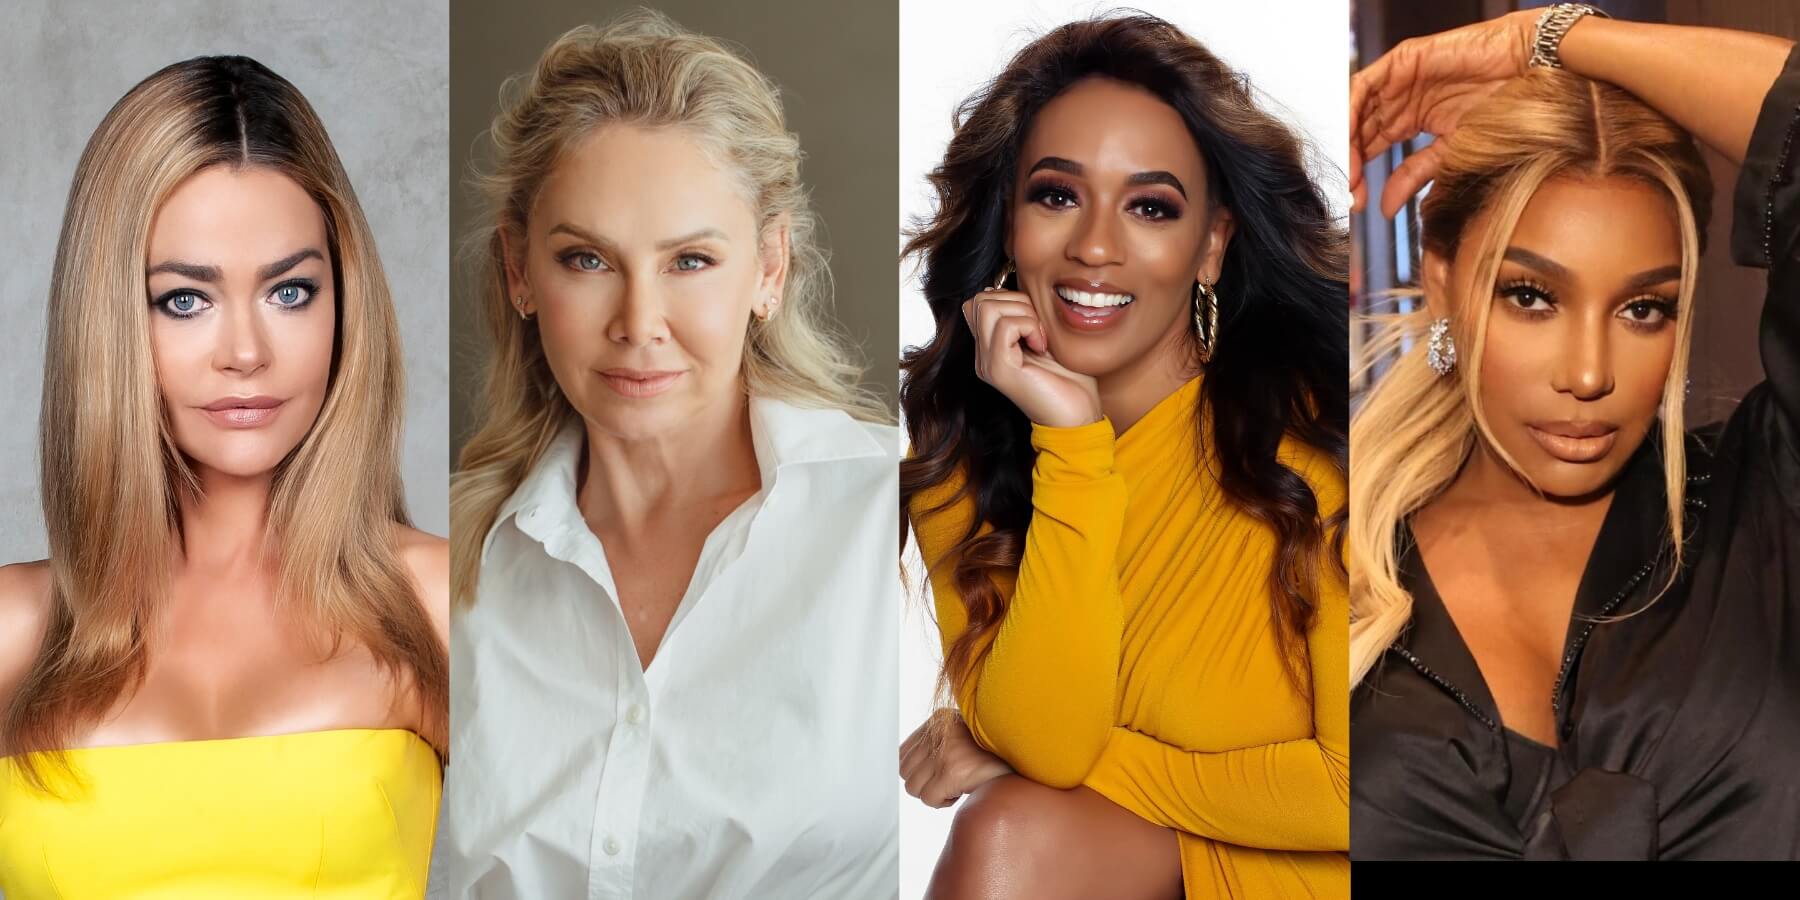 'Real Housewives of Beverly Hills' Denise Richards, 'DWTS' Kym Herjavec, 'The Joe Budden Podcast' Melyssa Ford, and 'Real Housewives of Atlanta' star NeNe Leakes star in 'Hunting Housewives' on Lifetime.